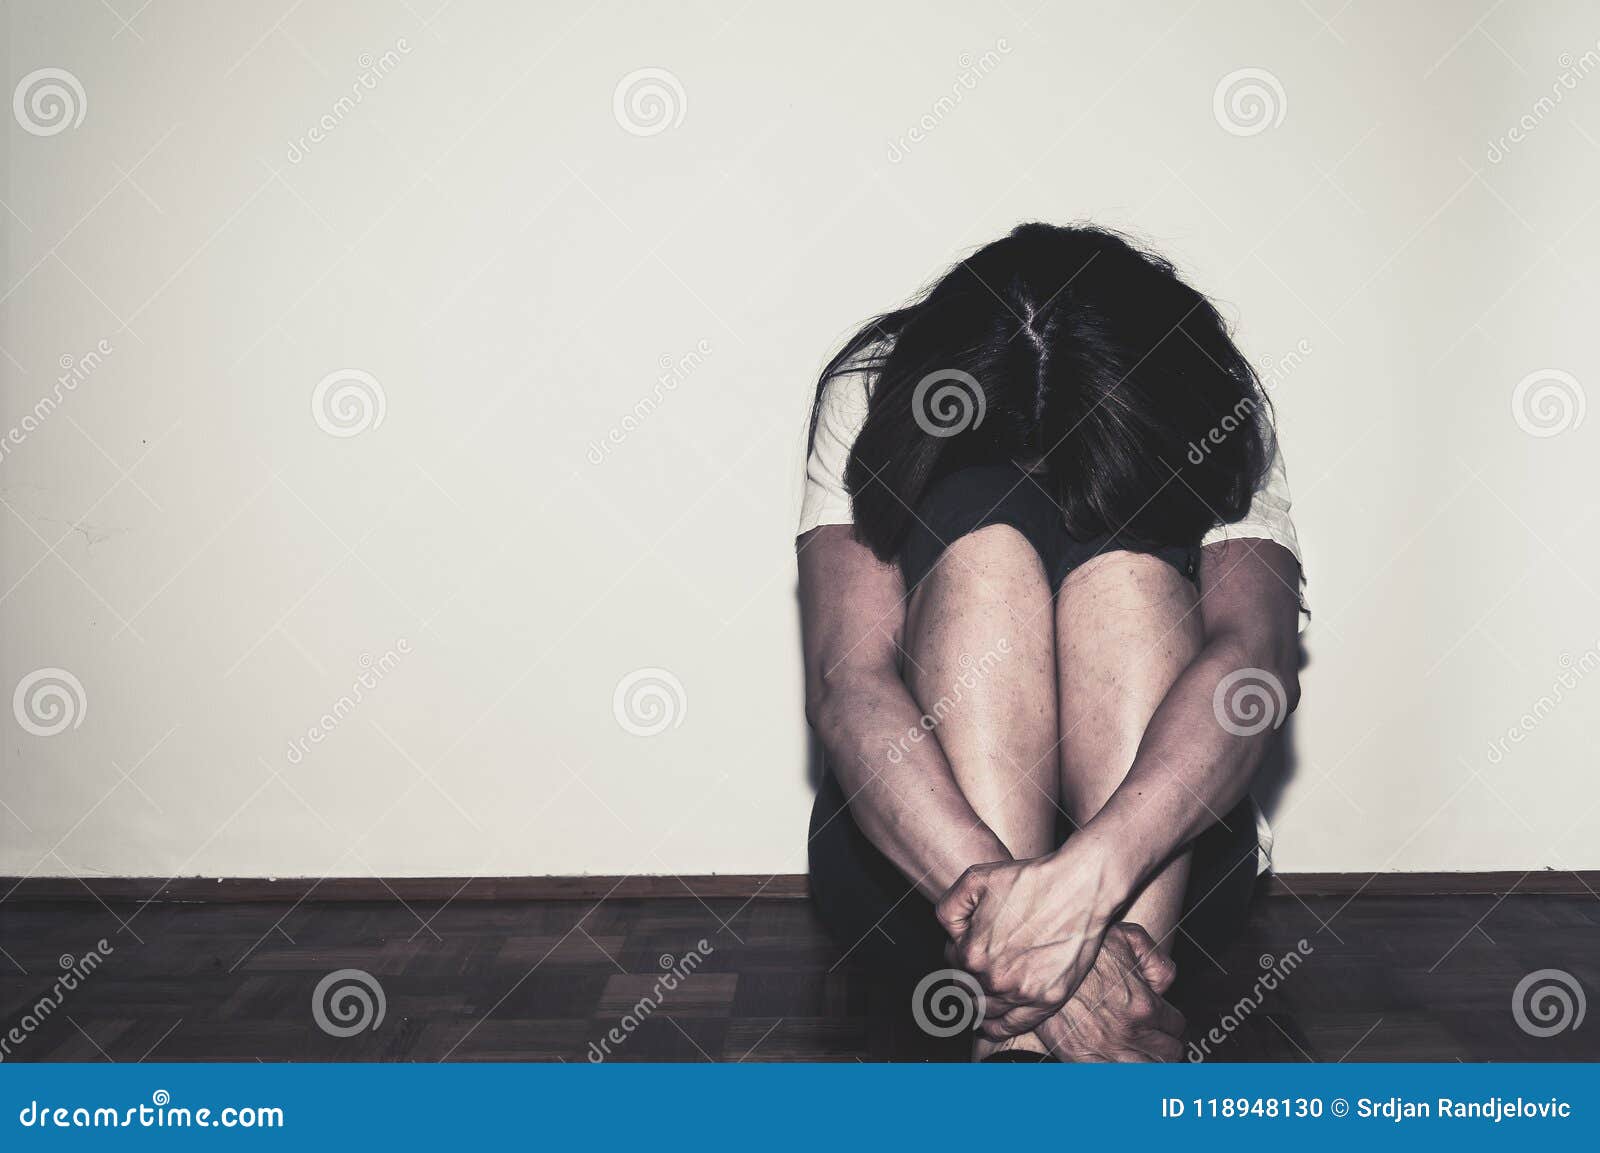 depressed and lonely girl abused as young sitting alone in her room on the floor feeling miserable and anxiety cry over her life,